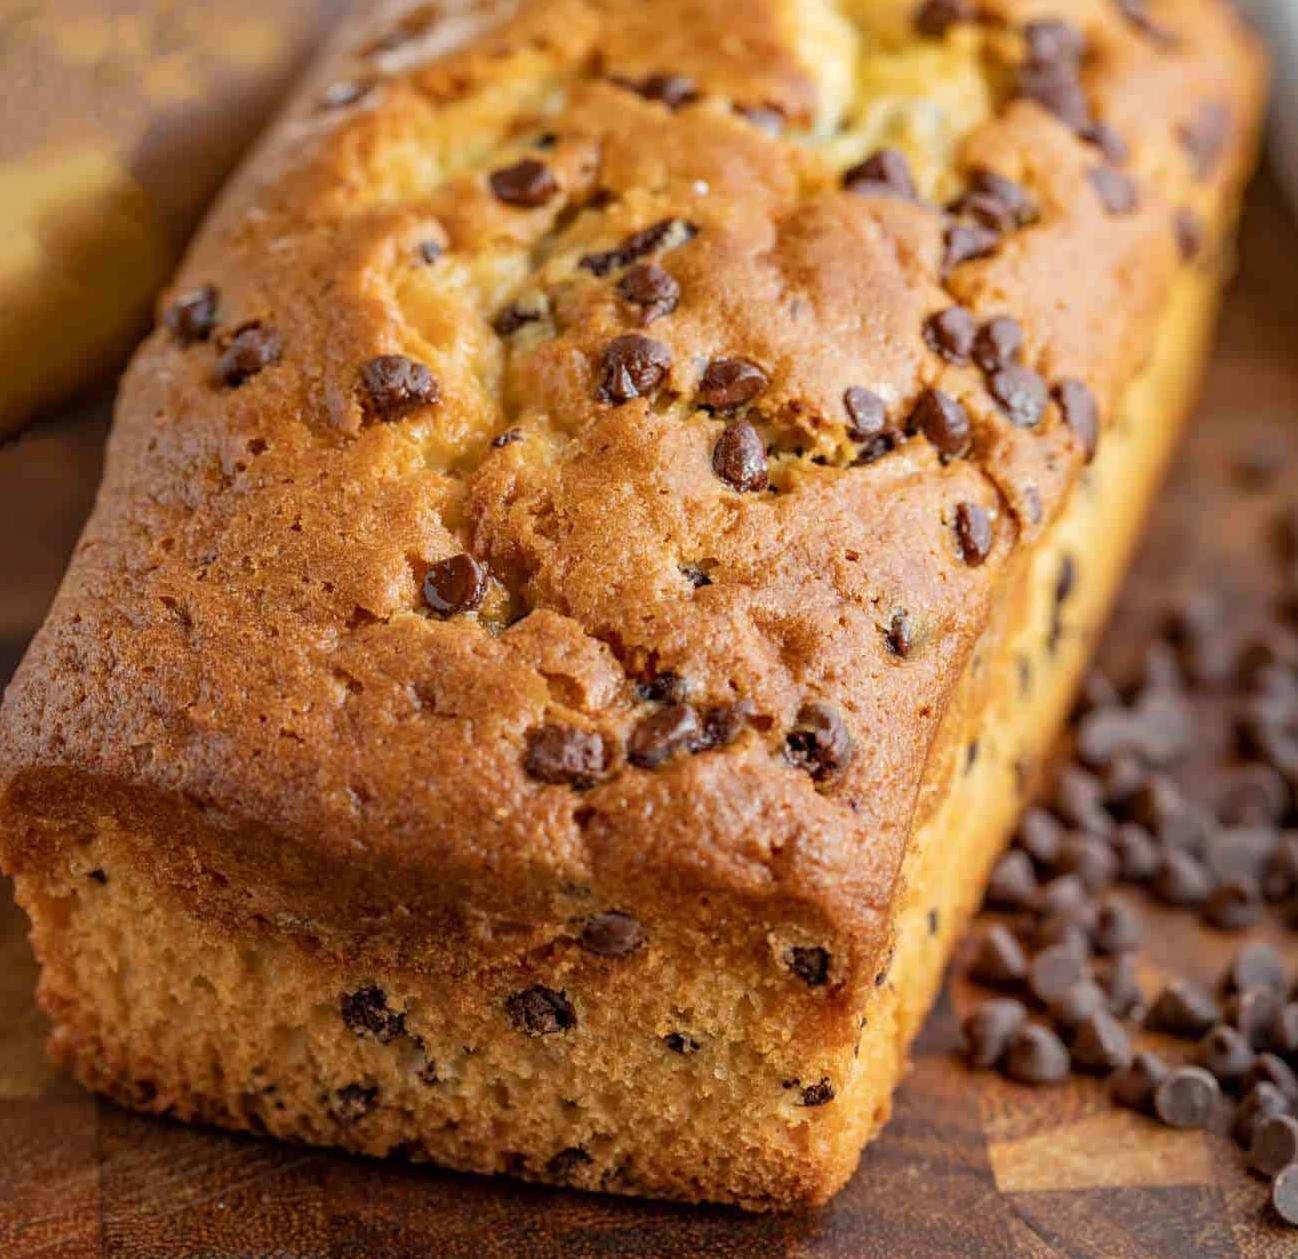  Chocolate chip goodness in a healthier form!